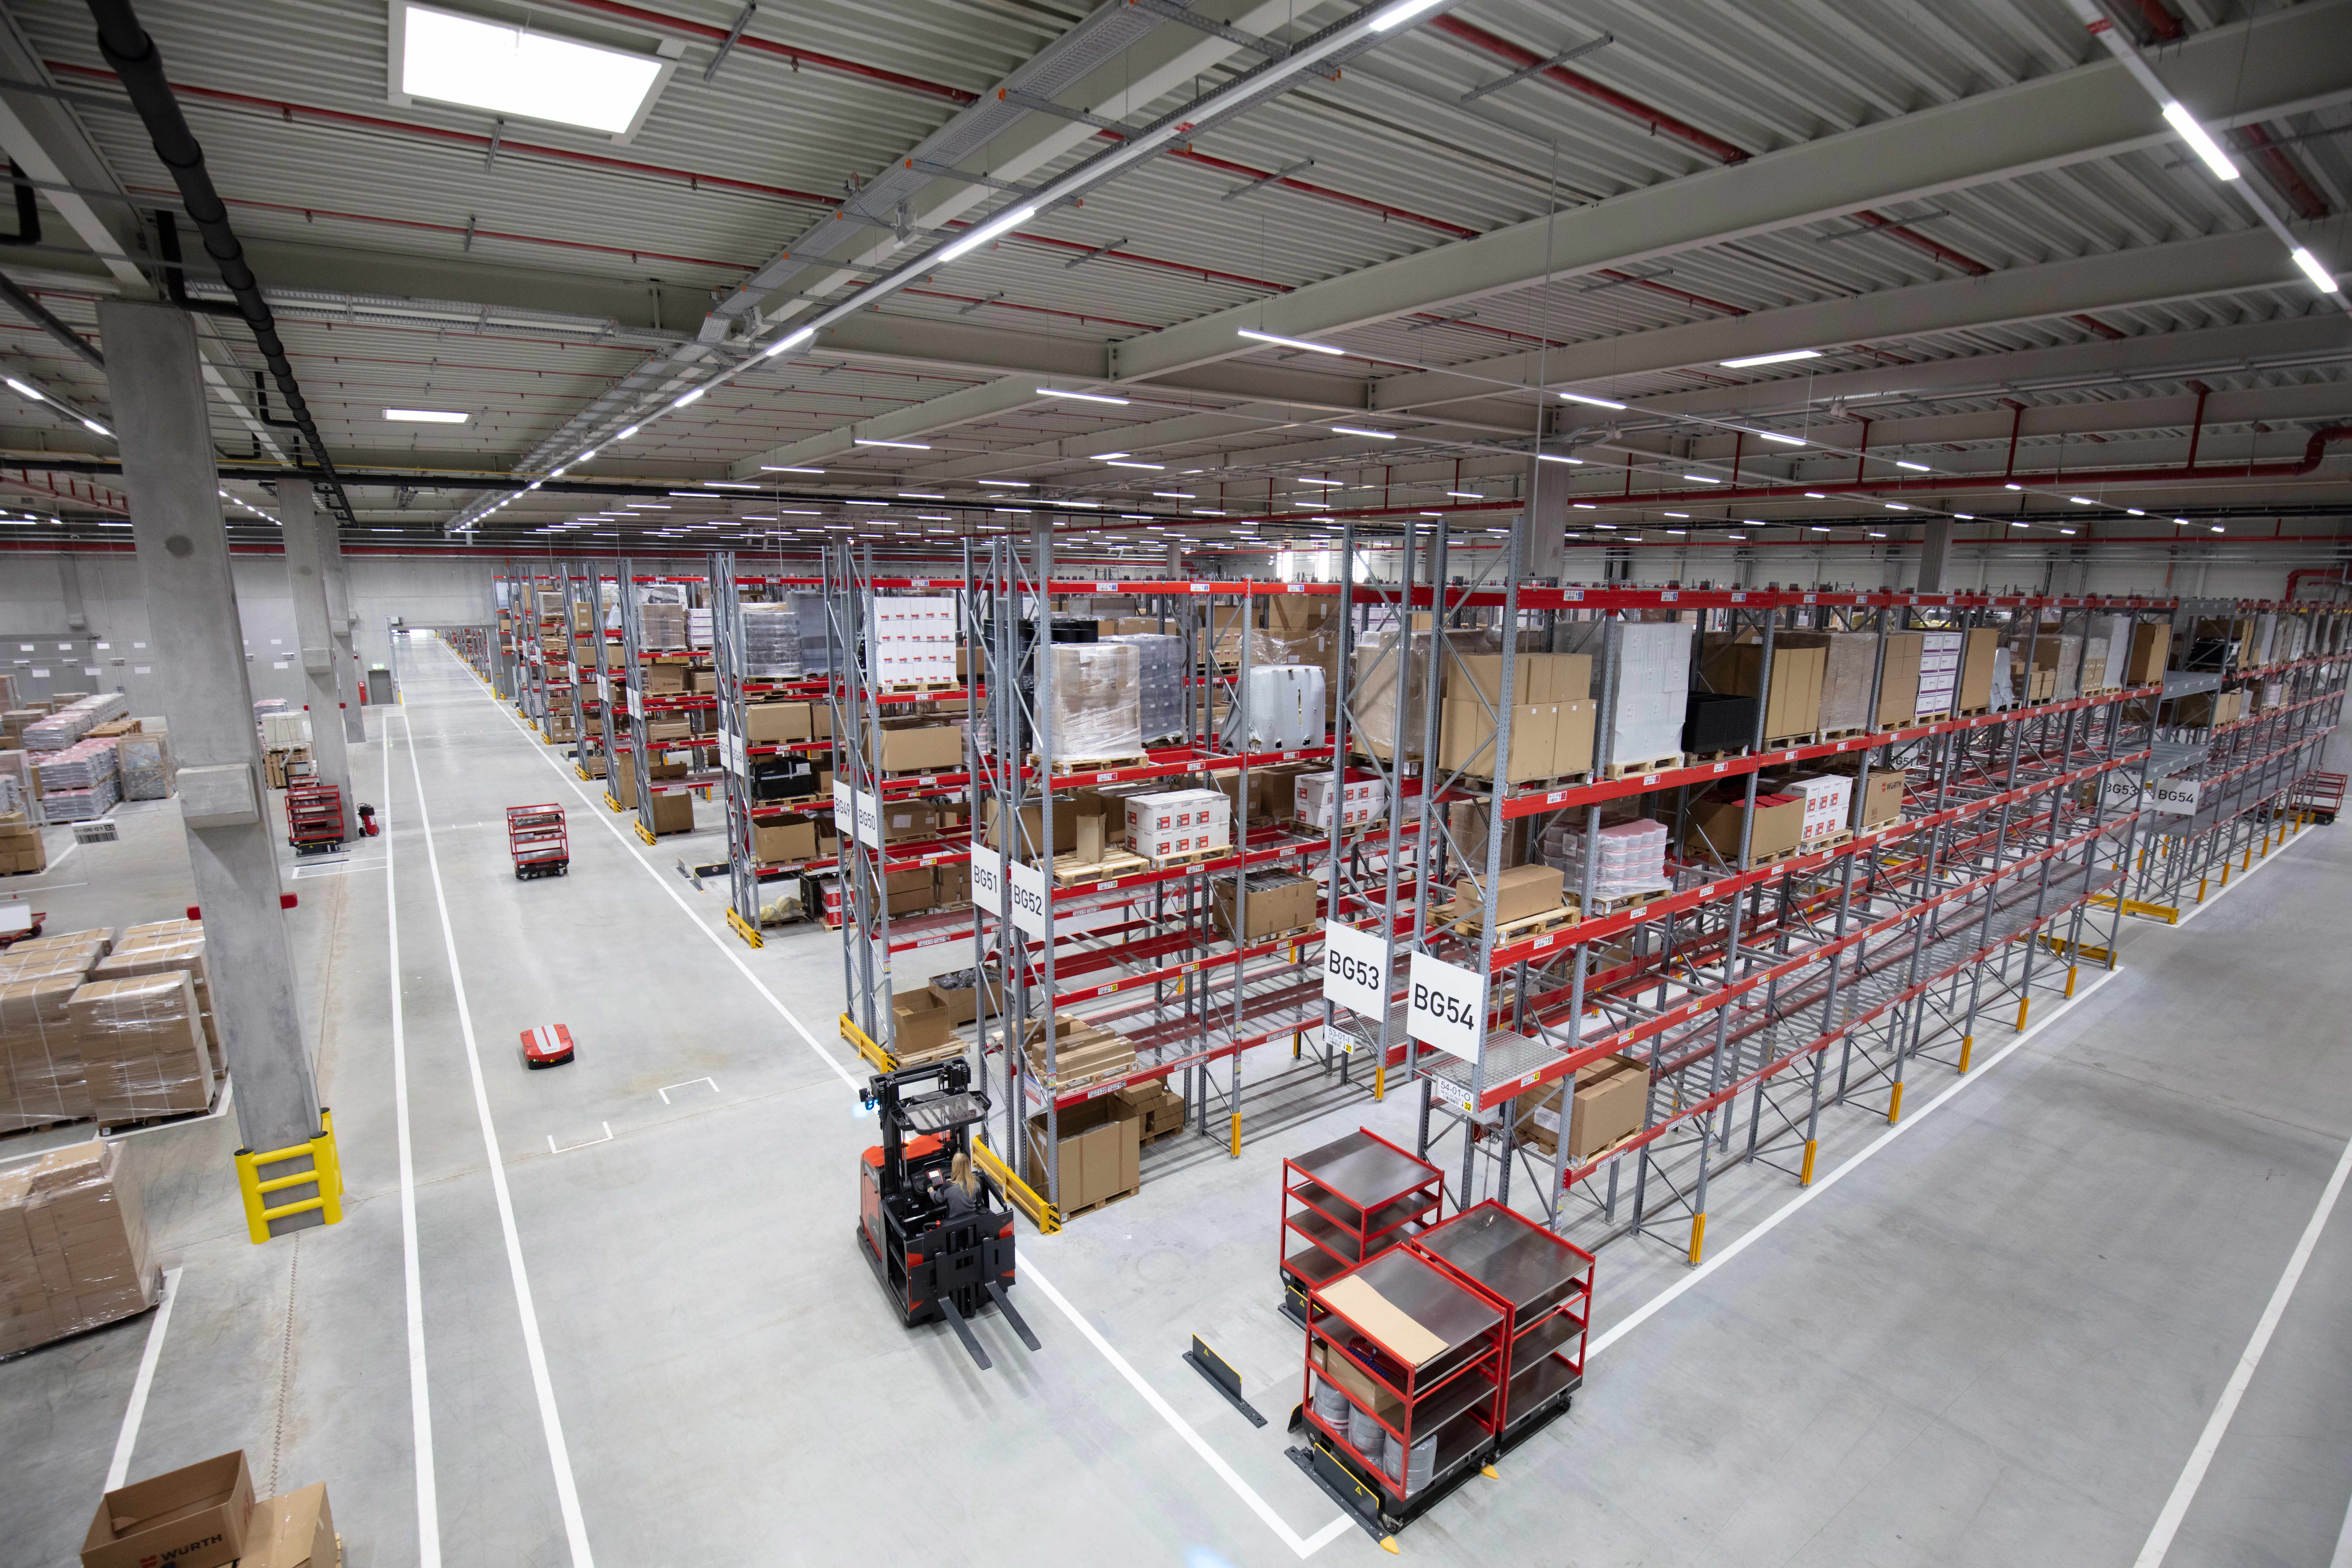 Goods for Würth subsidiaries and shipments to customers throughout Europe are handled at the logistics center of the Adolf Würth GmbH & Co. KG in Kupferzell in the Hohenlohe district in Baden-Württemberg. © Würth GmbH & Co. KG